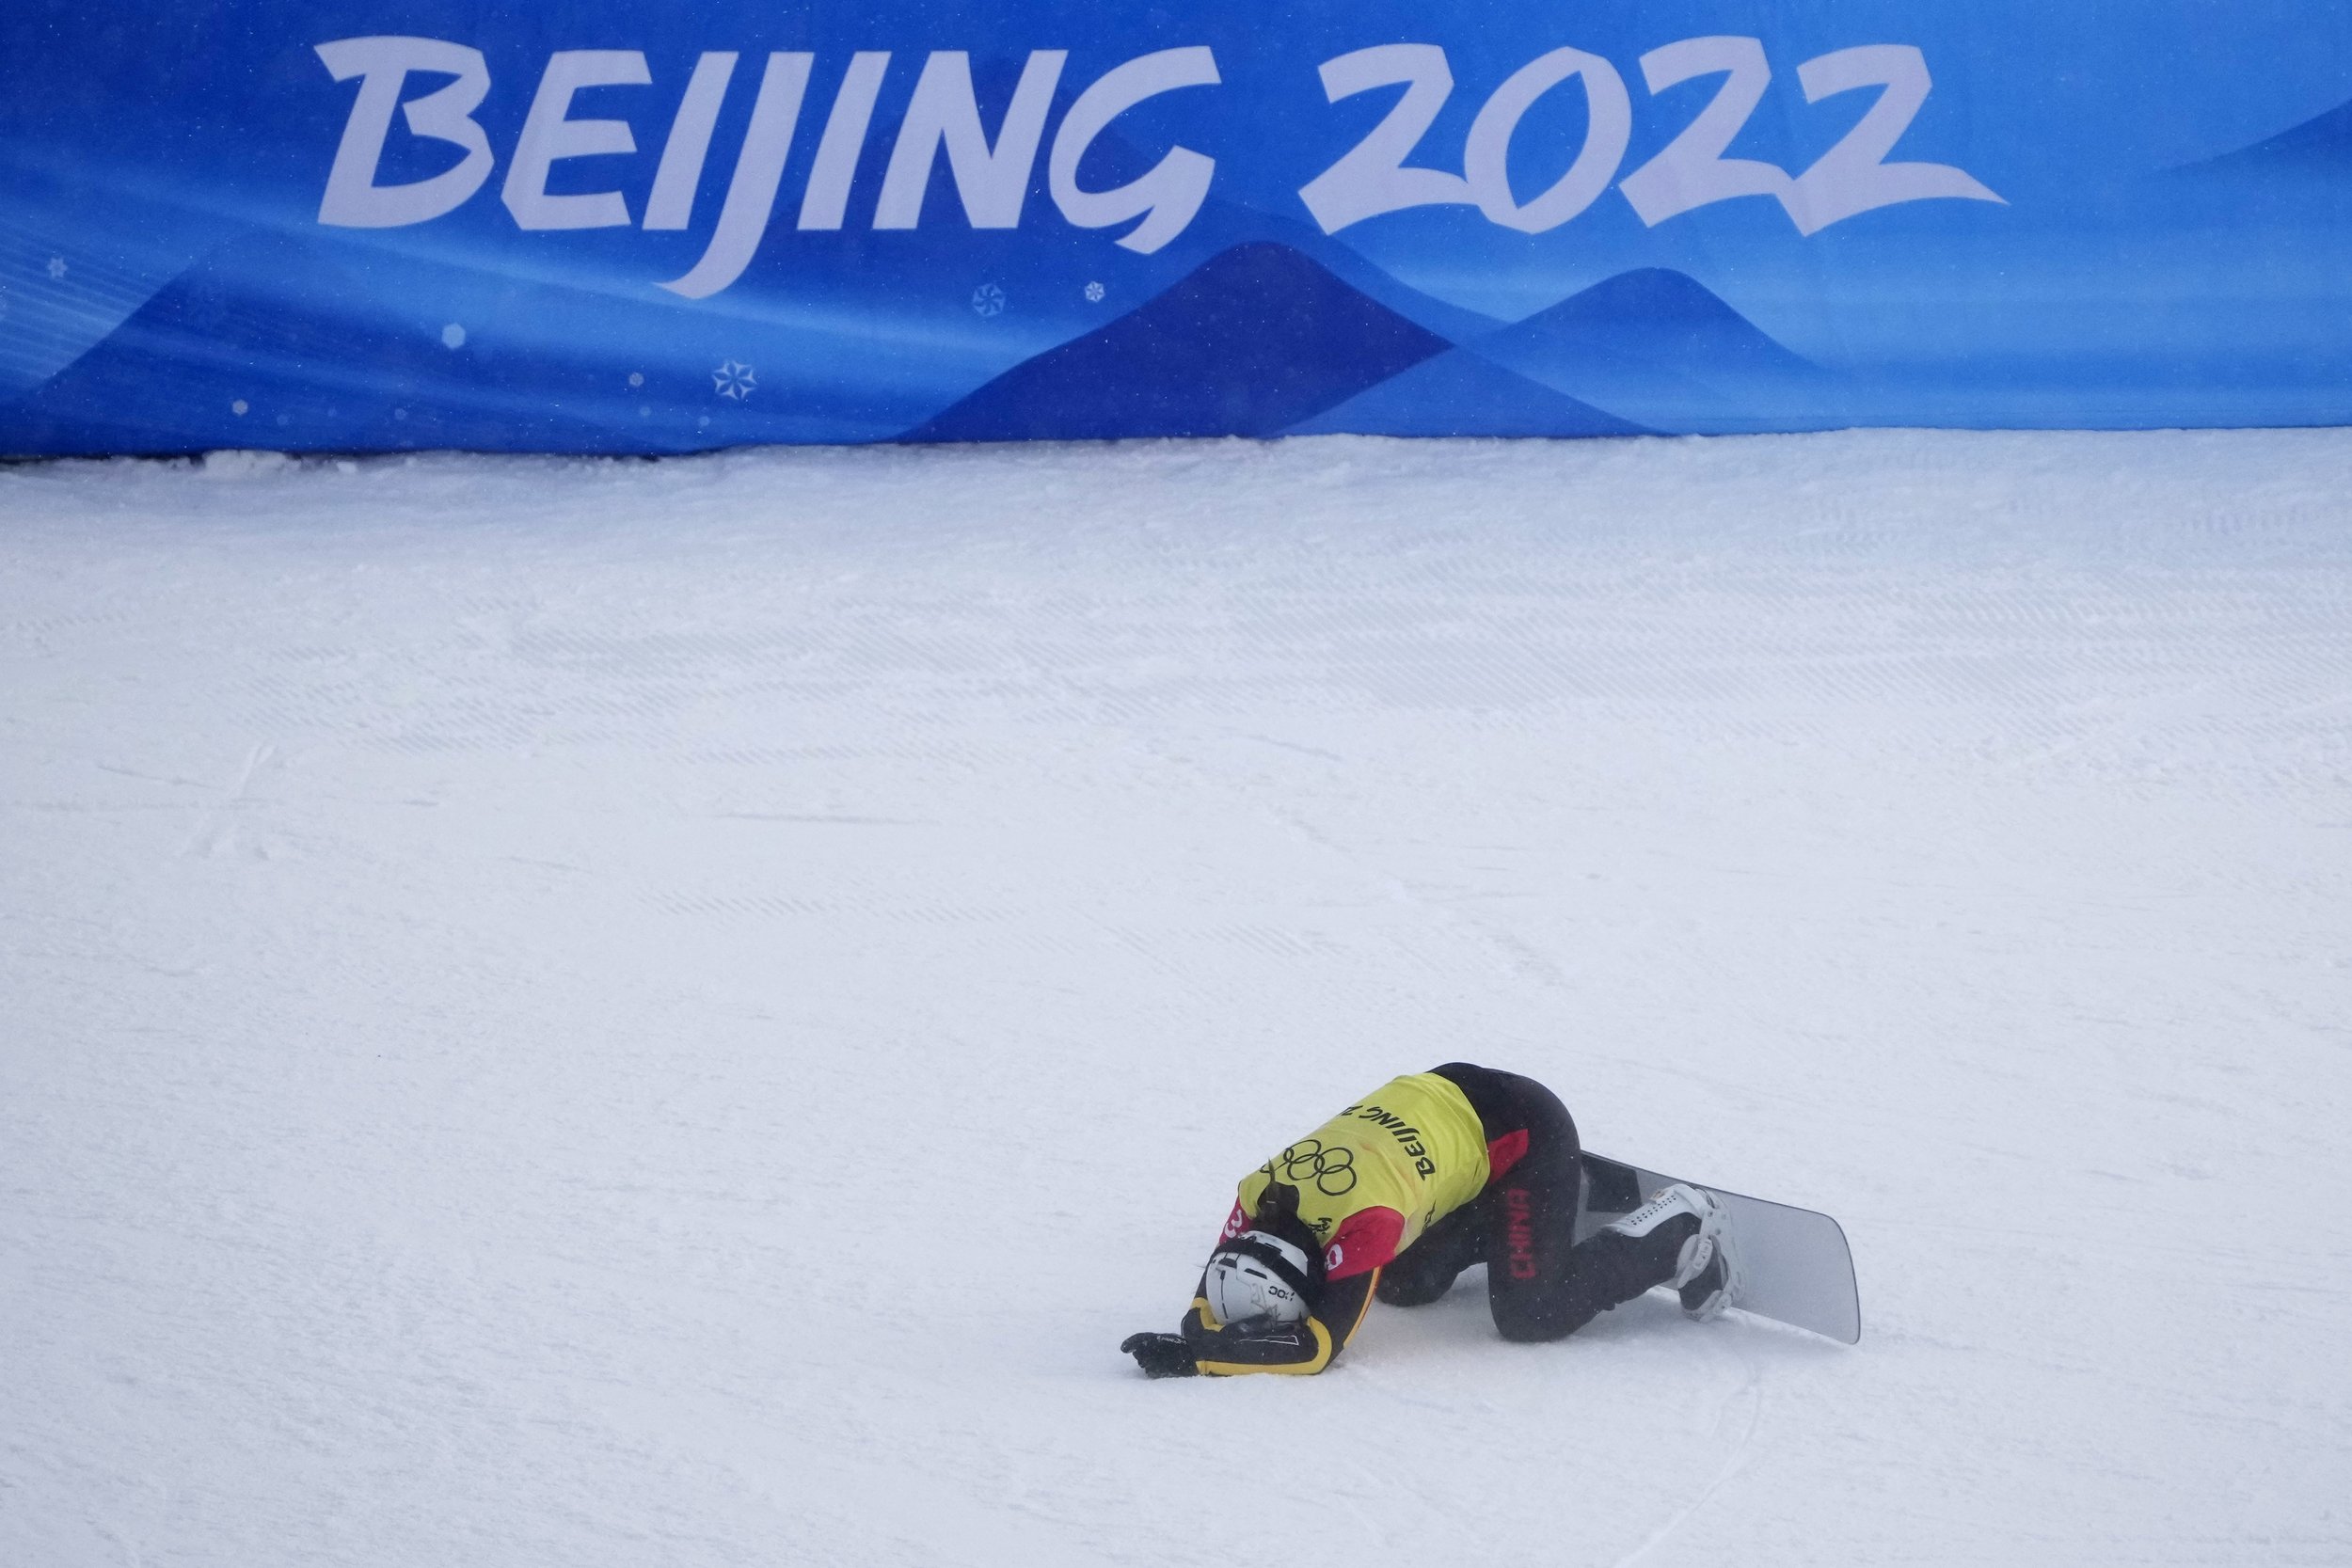  China's Feng He reacts after competing during the women's snowboard cross finals at the 2022 Winter Olympics, Wednesday, Feb. 9, 2022, in Zhangjiakou, China. (AP Photo/Aaron Favila) 